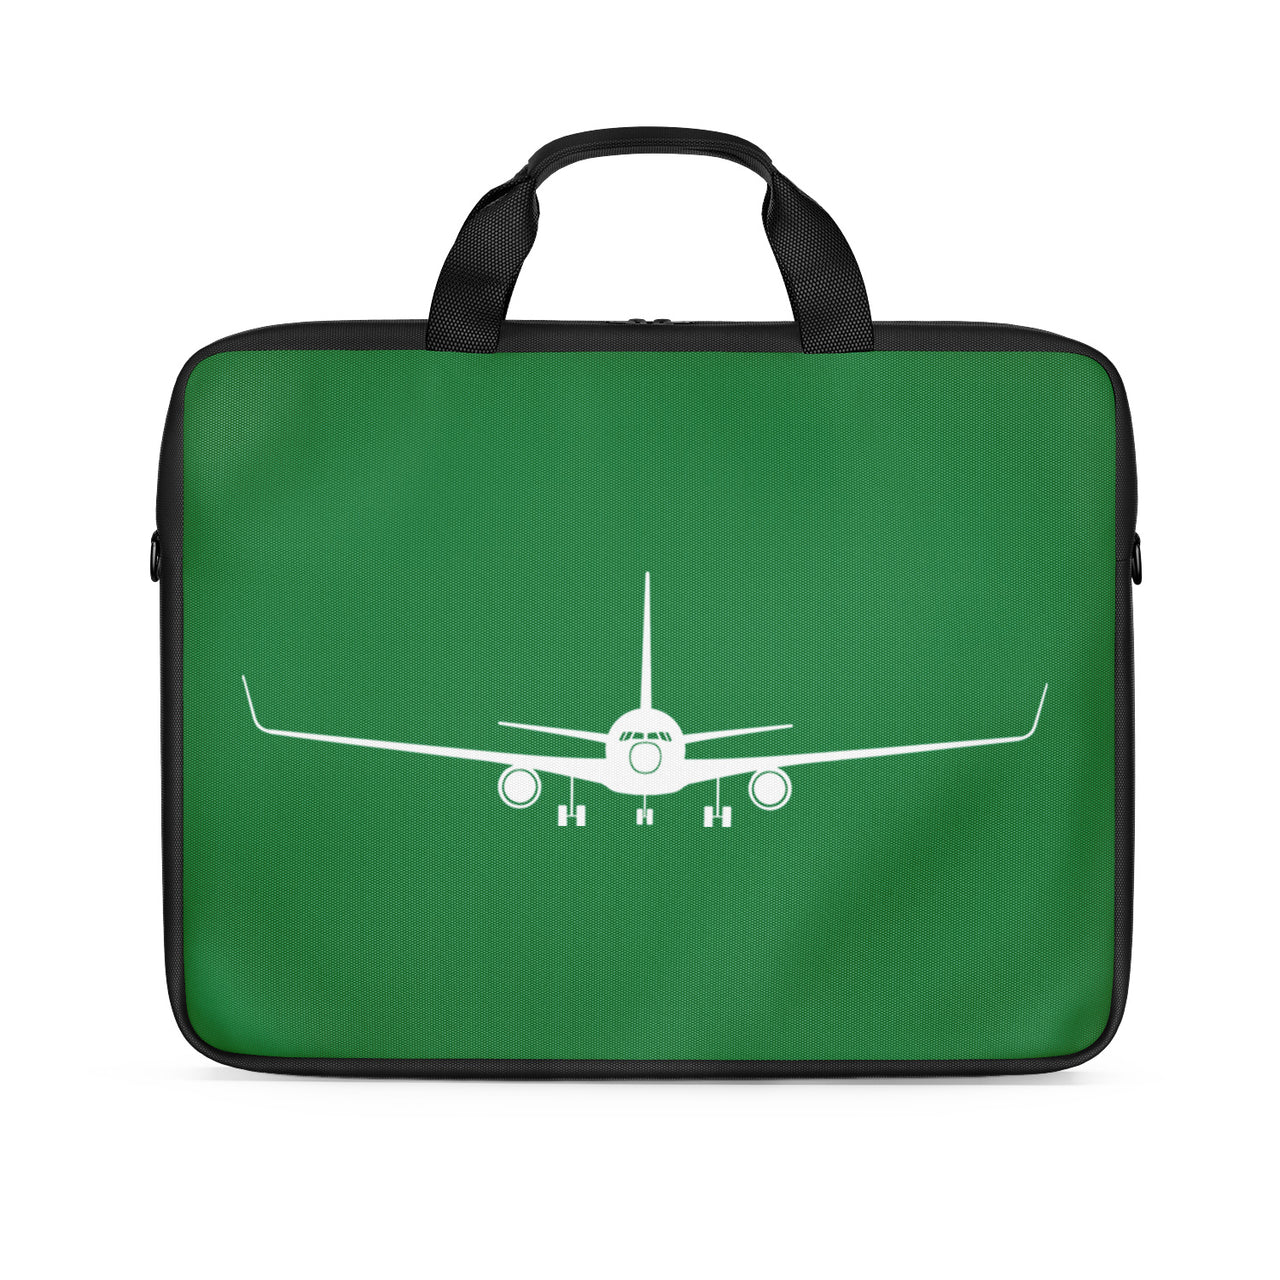 Boeing 767 Silhouette Designed Laptop & Tablet Bags